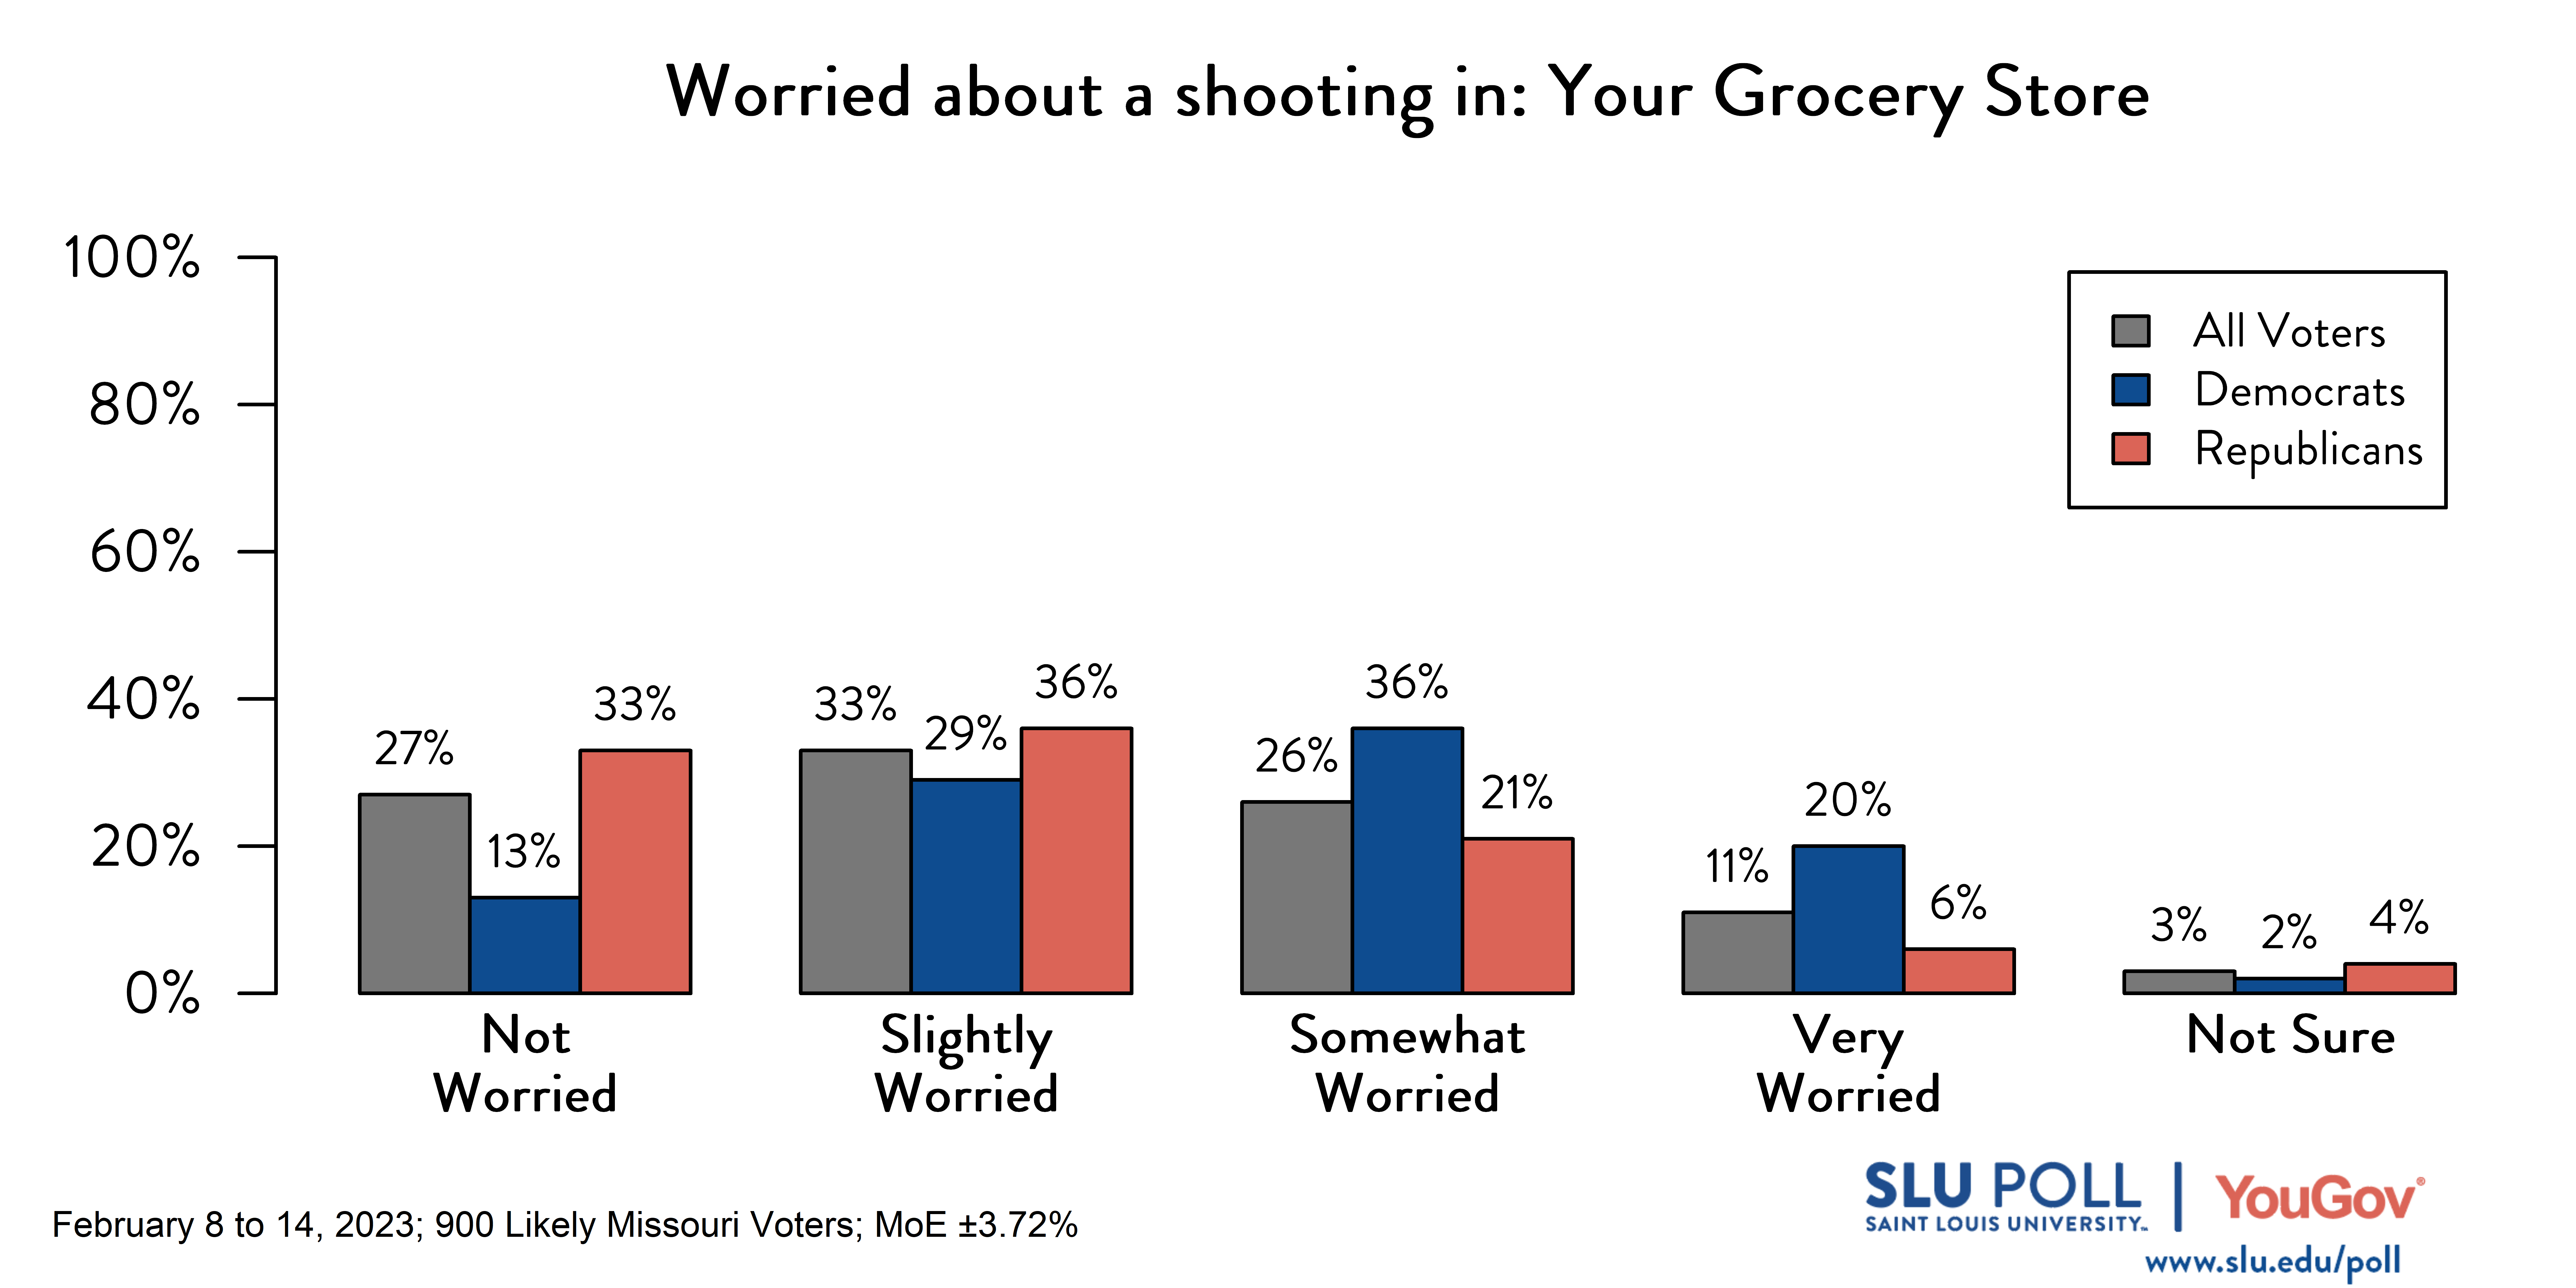 Likely voters' responses to 'How worried are you about the possibility of a shooting ever happening: at your grocery store?': 27% Not worried, 33% Slightly worried, 26% Somewhat worried, 11% Very worried, and 3% Not sure. Democratic voters' responses: ' 13% Not worried, 29% Slightly worried, 36% Somewhat worried, 20% Very worried, and 2% Not sure. Republican voters' responses: 33% Not worried, 36% Slightly worried, 21% Somewhat worried, 6% Very worried, and 4% Not sure.